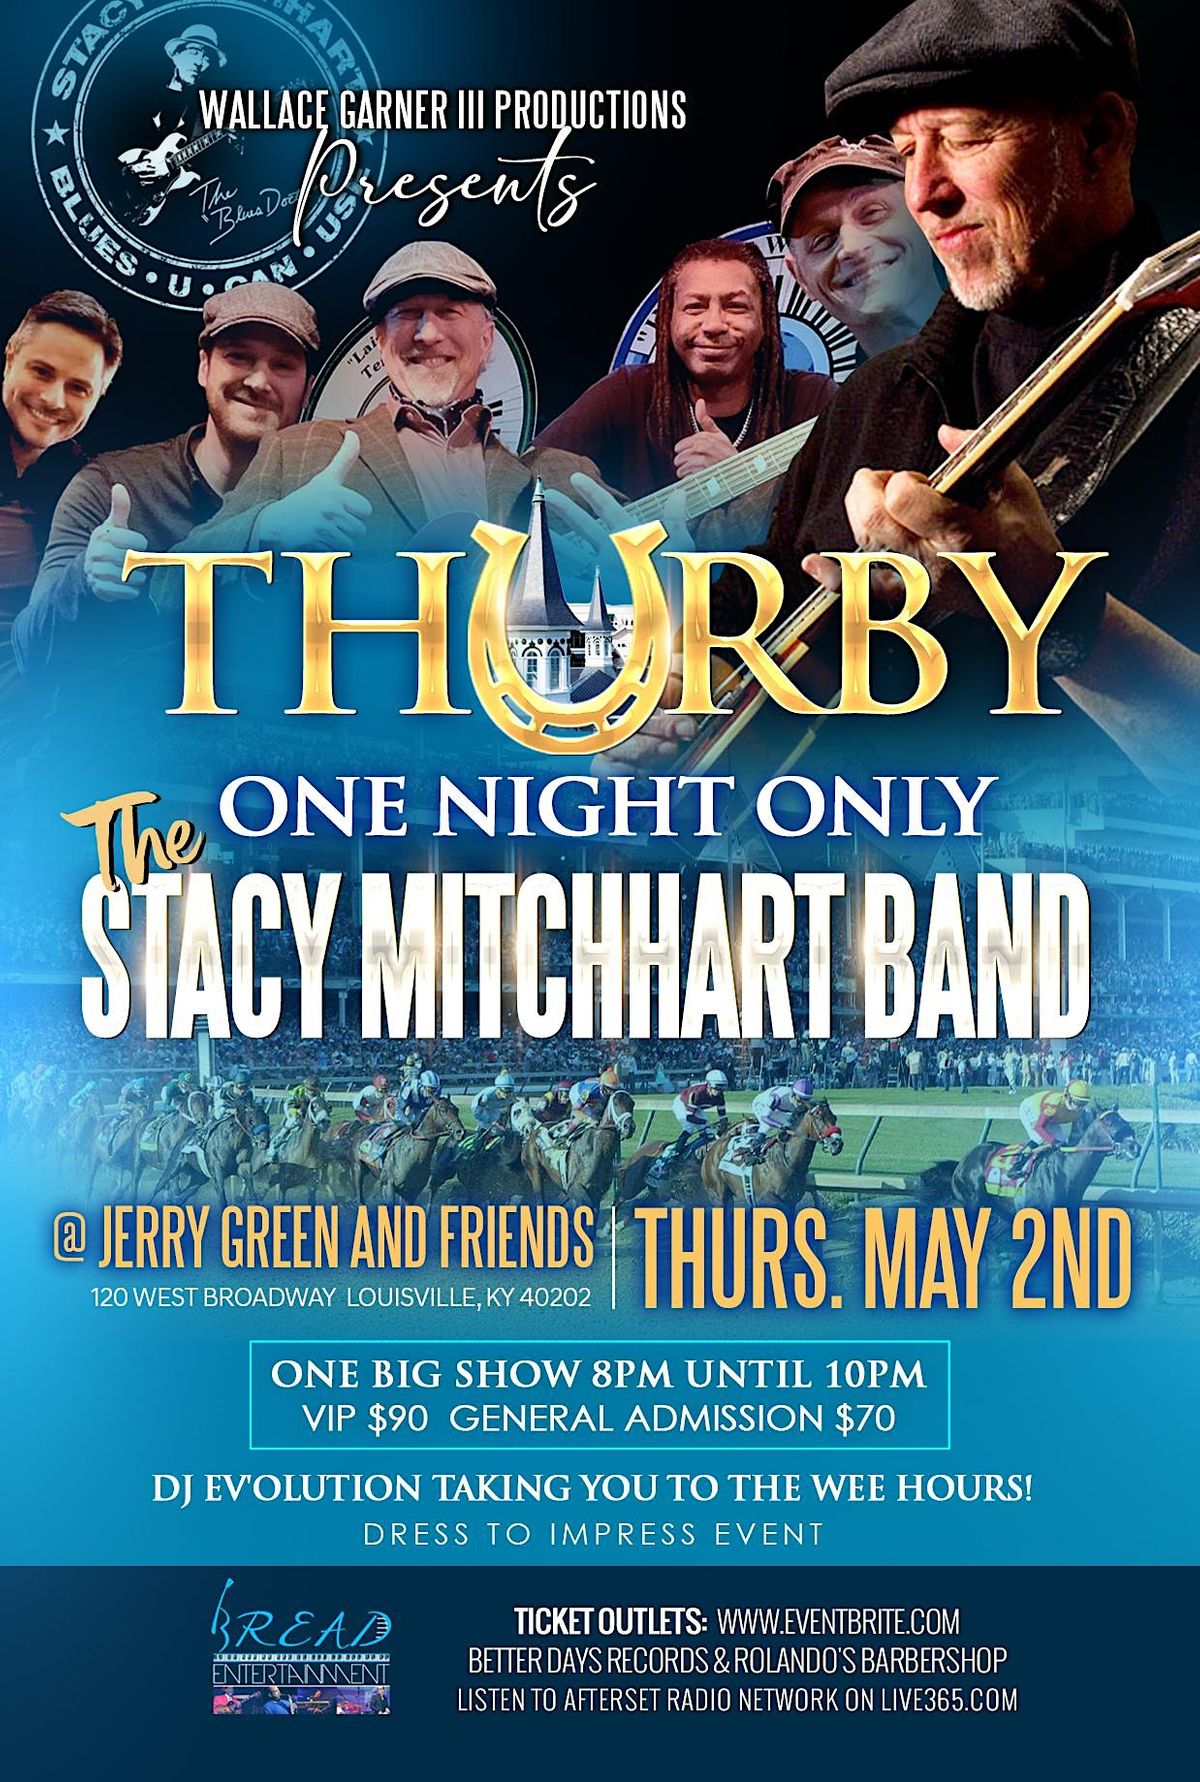 WGIII Productions Presents, Thurby, One  Night Only!, with Stacy Mitchhart!